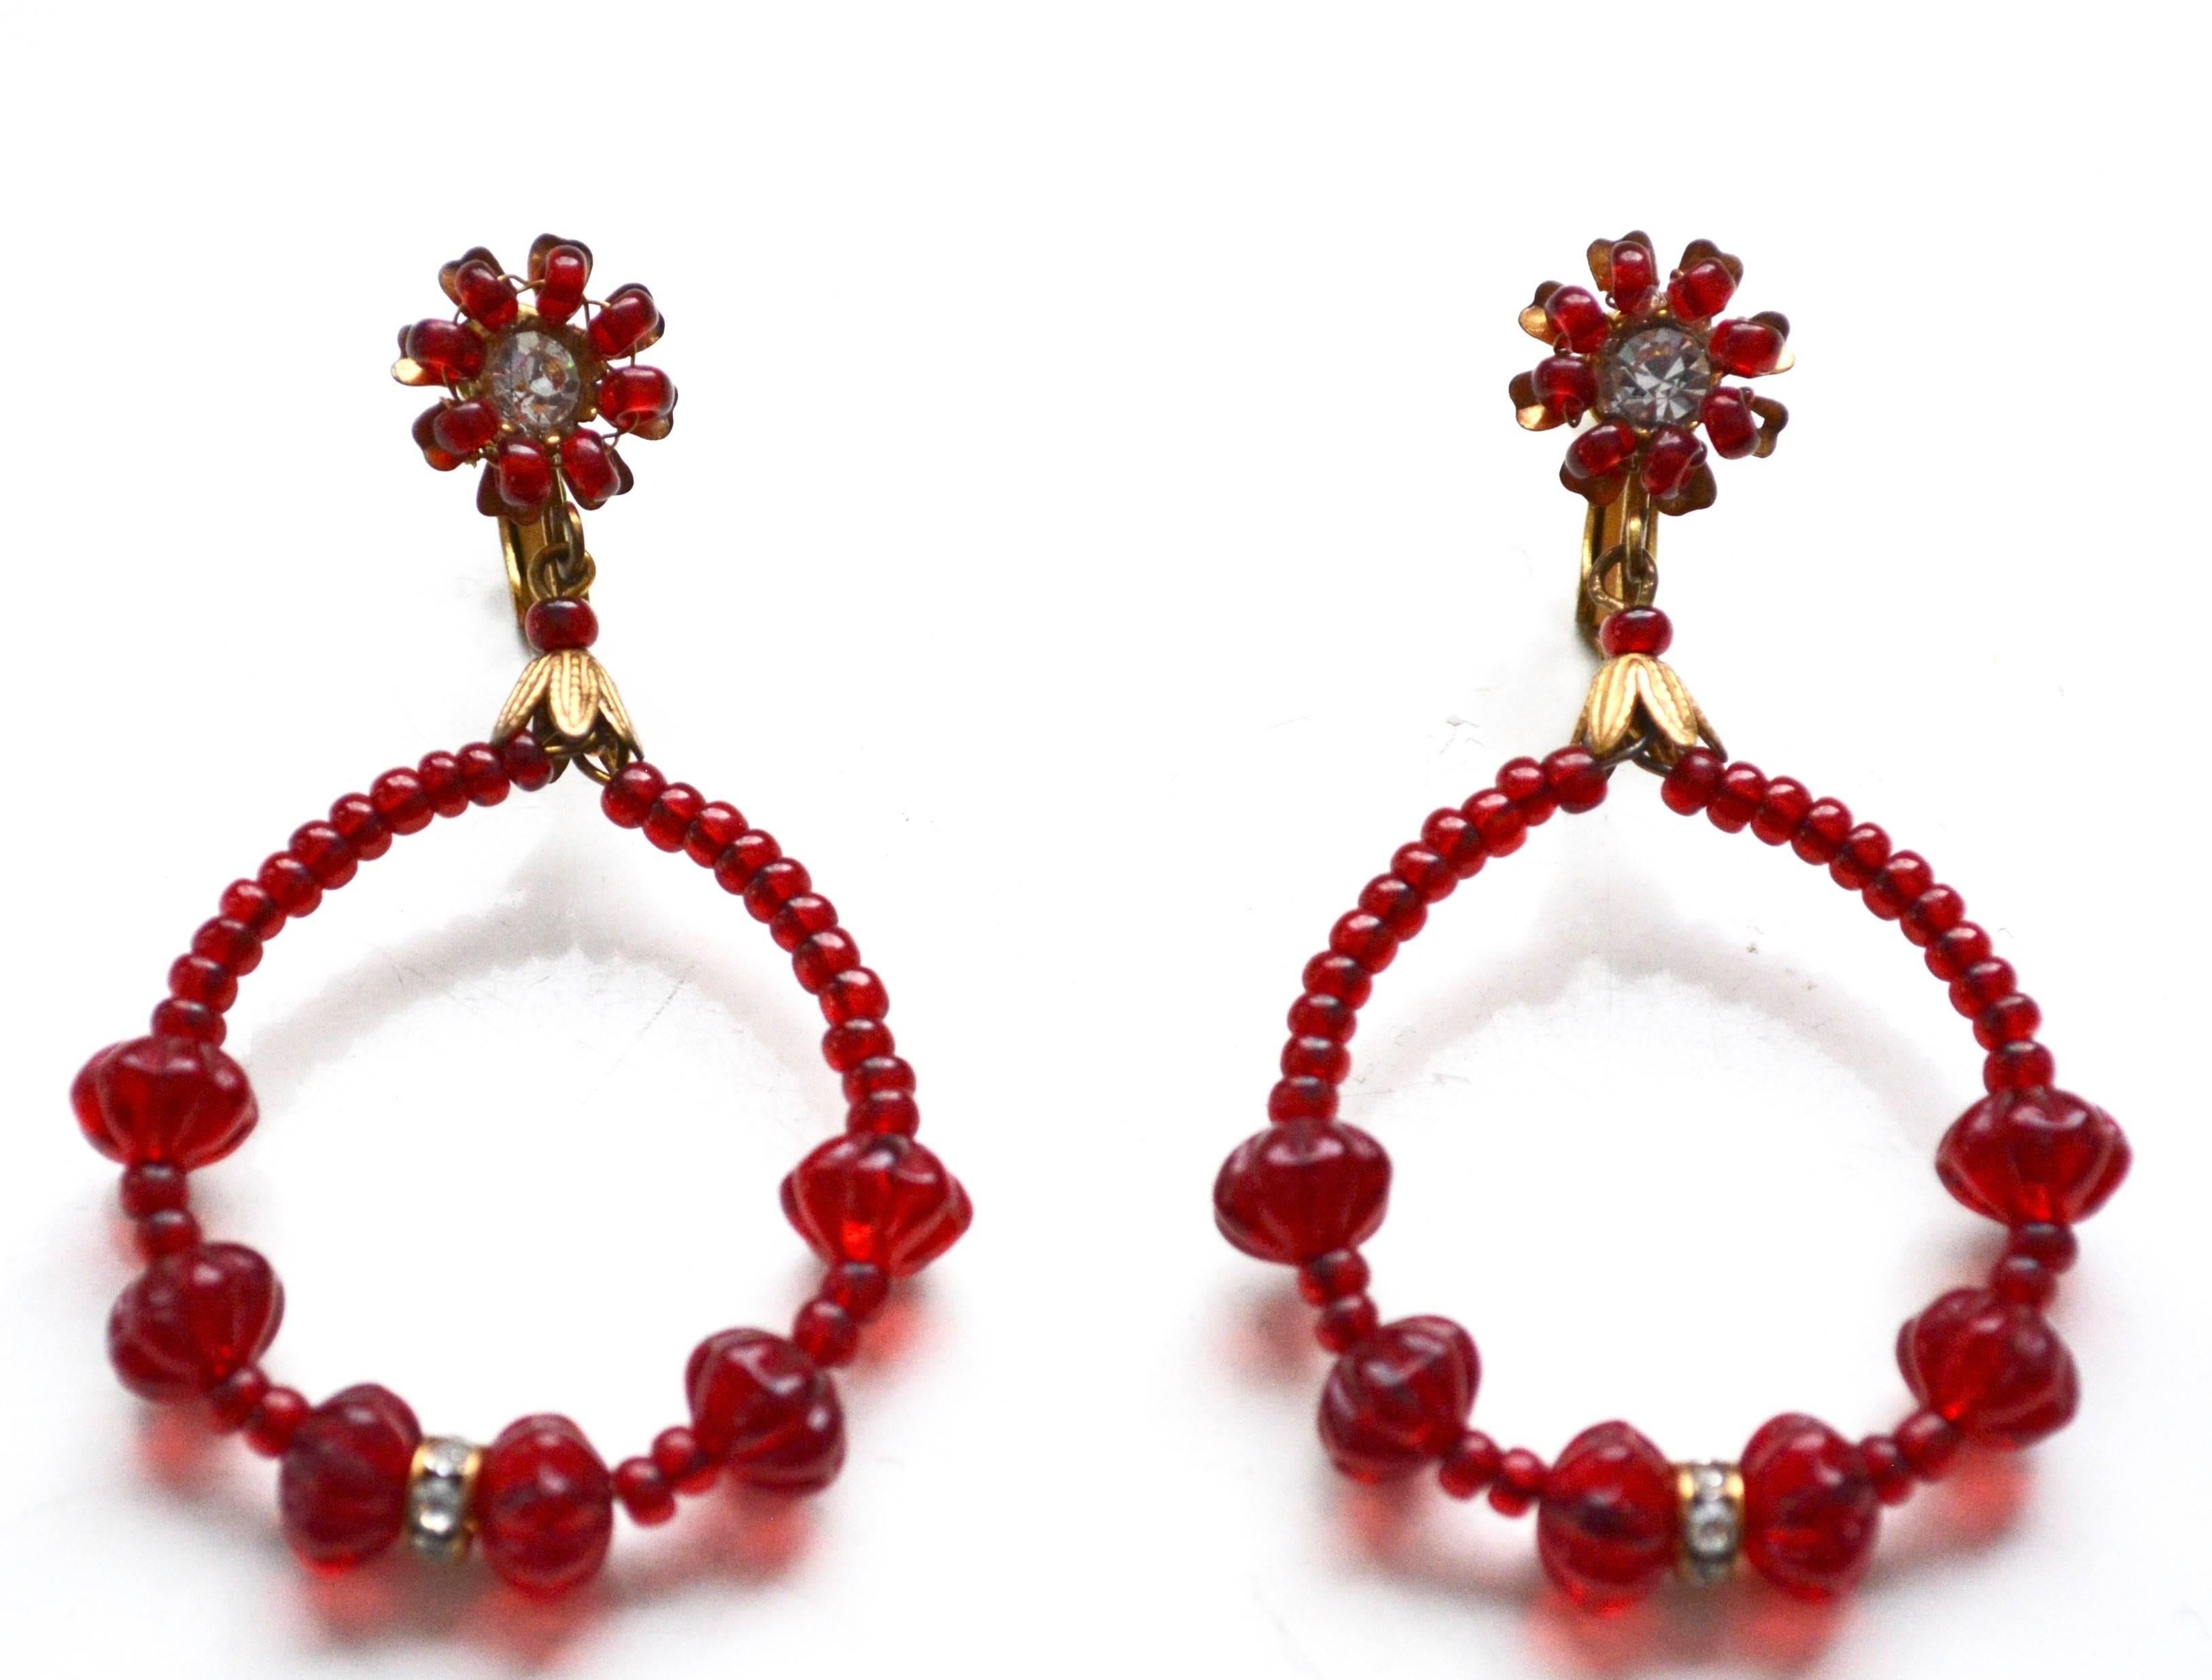 Vibrant rarer red signed Haskell glass bead earrings from the 1940s. Condition is excellent. 